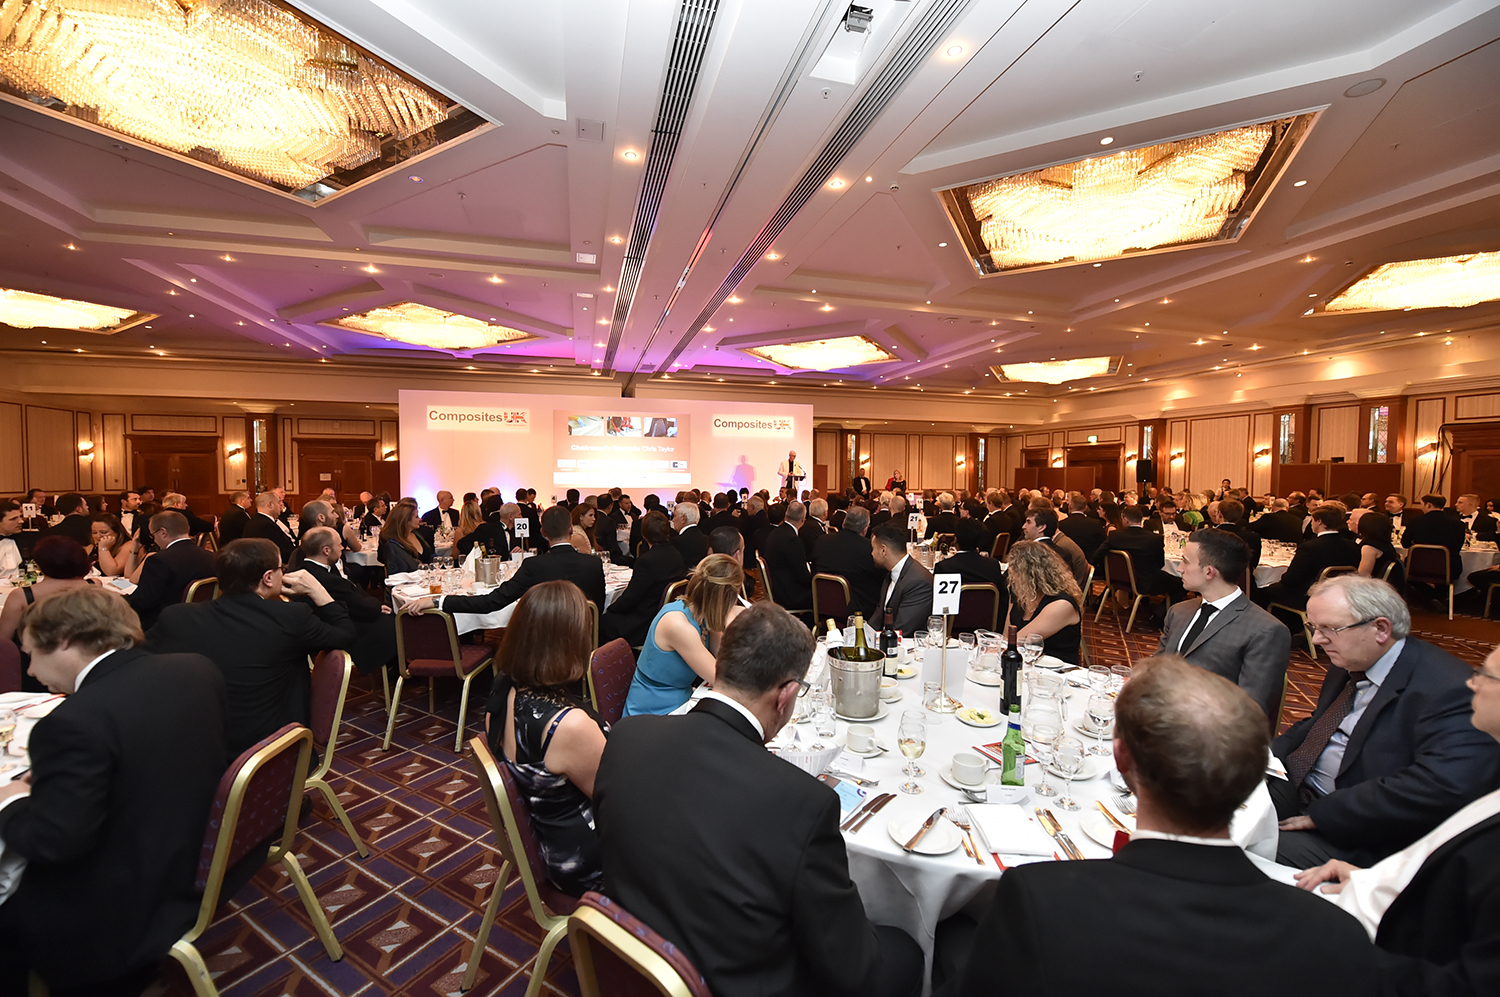 The next Composites UK Awards Dinner will reportedly take place on Wednesday 4 November 2020.